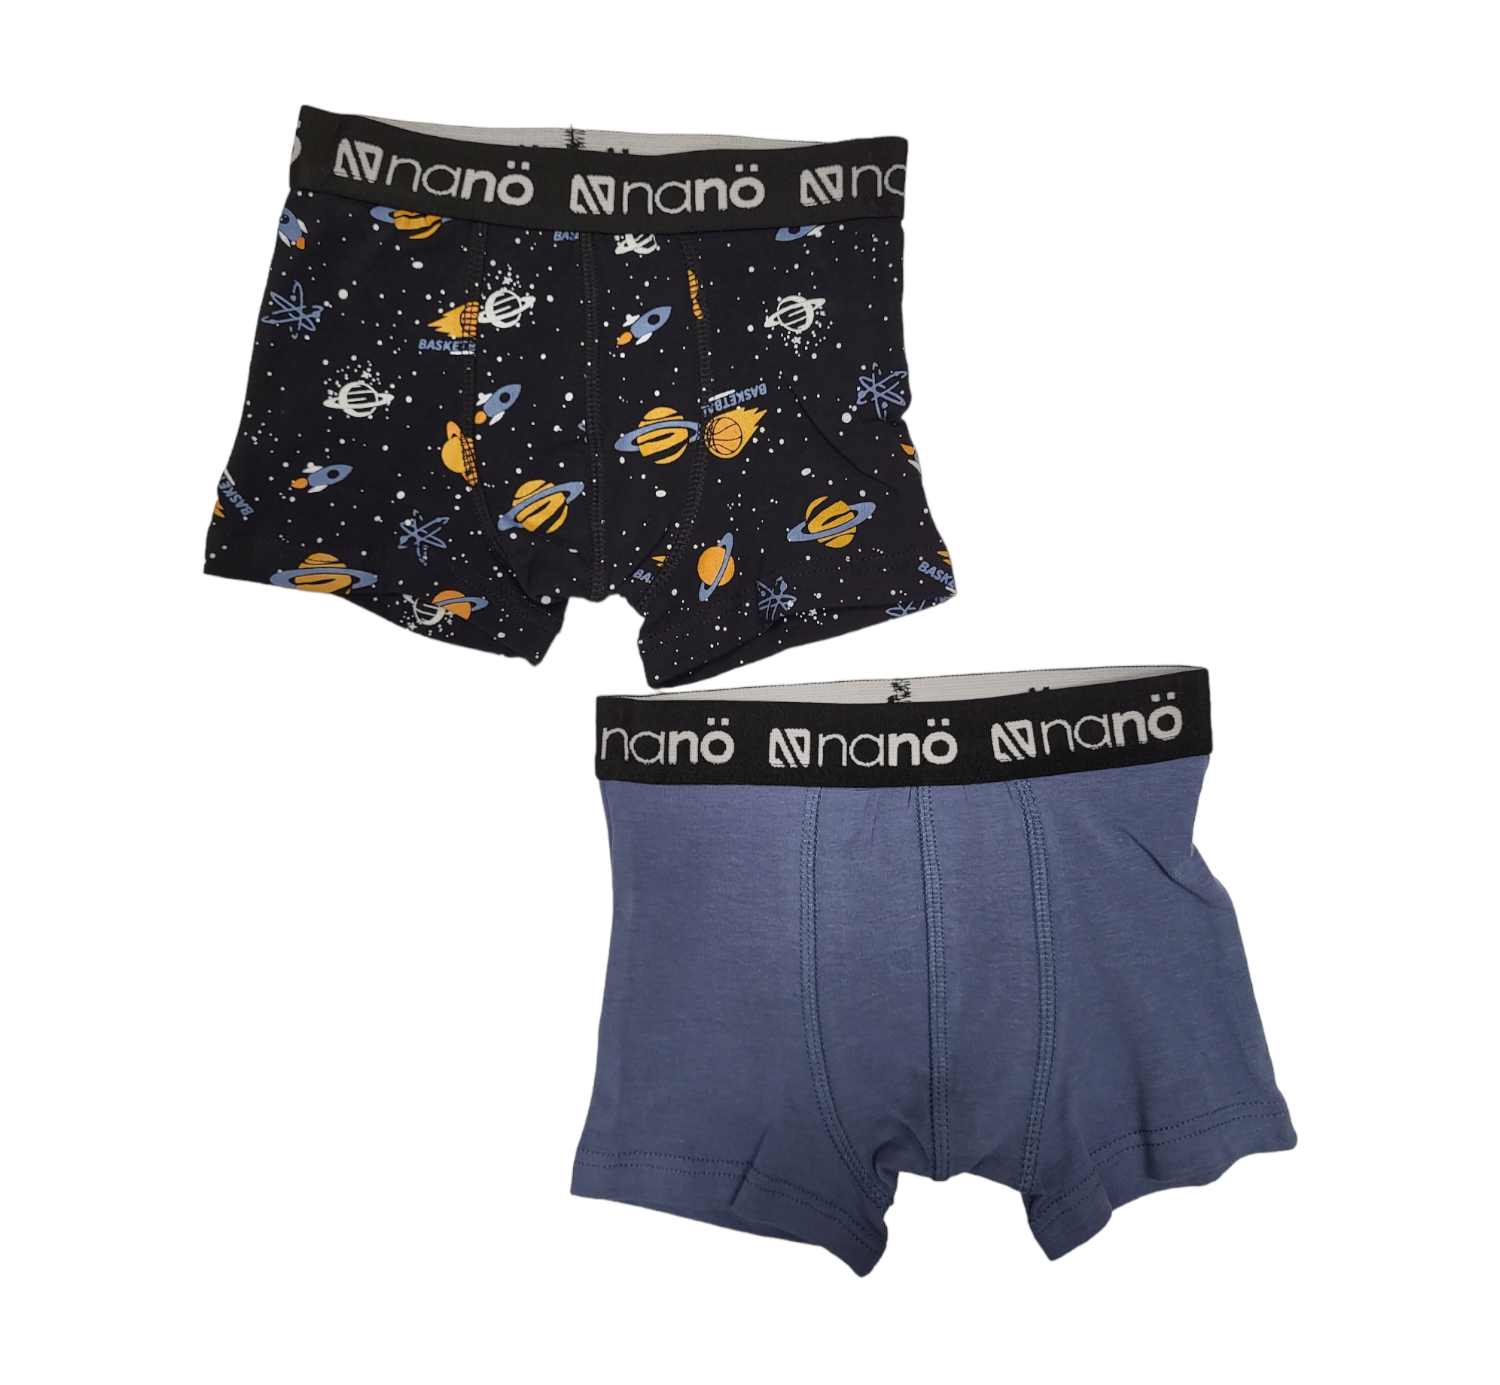 Boys Space Boxers - Set of 2